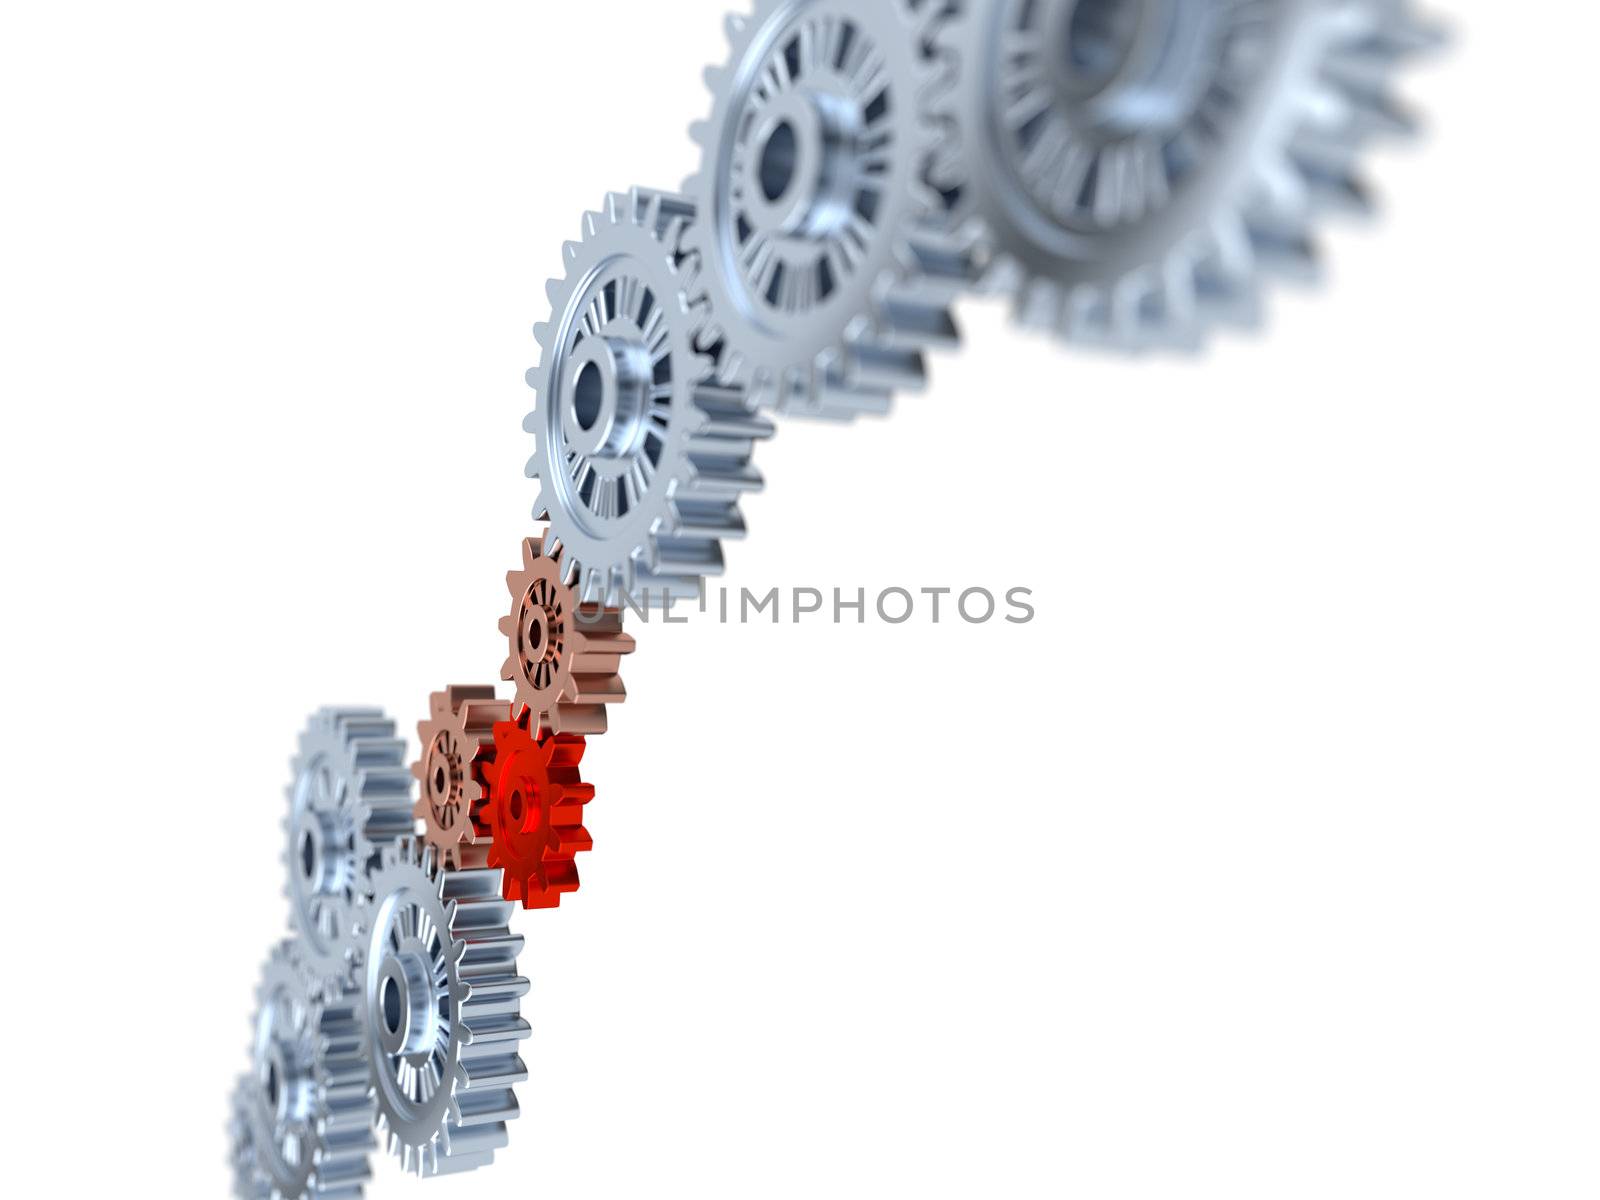 Some Silver Gears blurred with one Red on a White Background